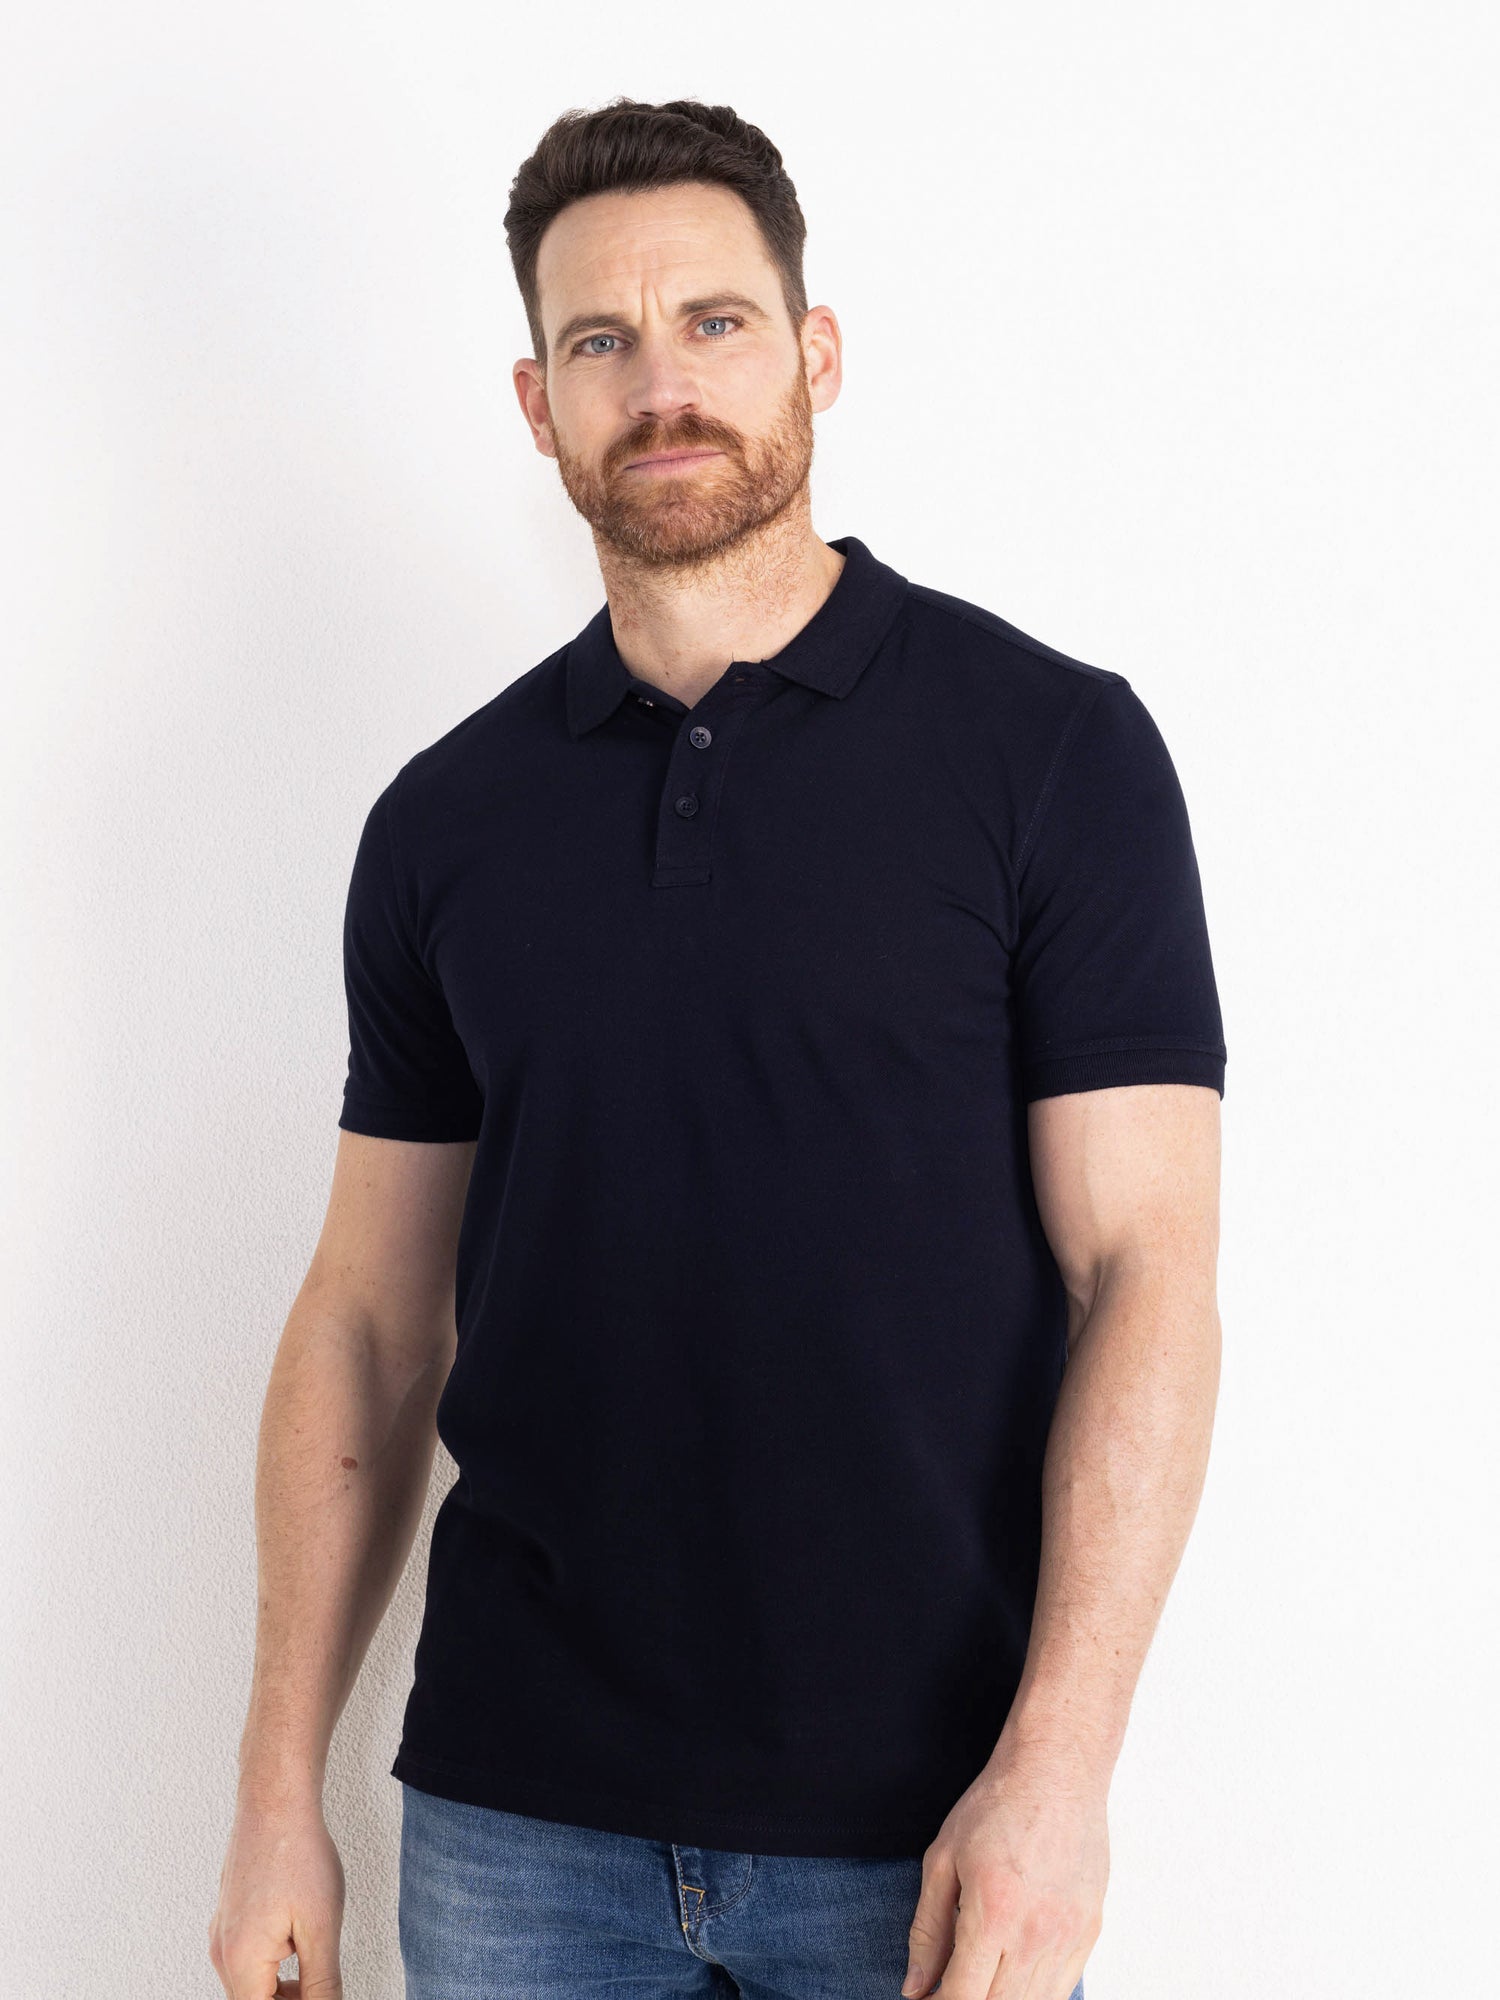 Classic polo shirt | Petrol Official Industries® webshop